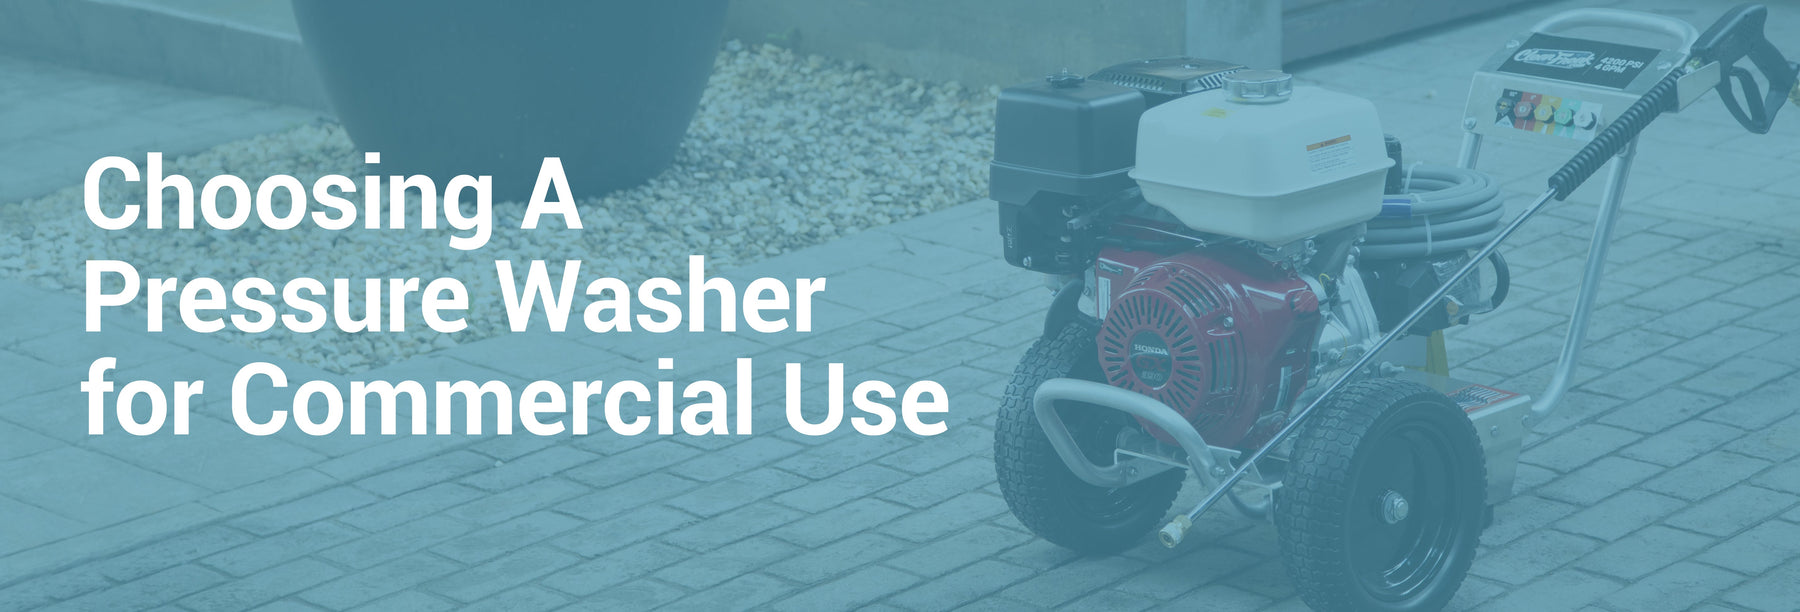 Choosing the Right Pressure Washer for Commercial Use Thumbnail